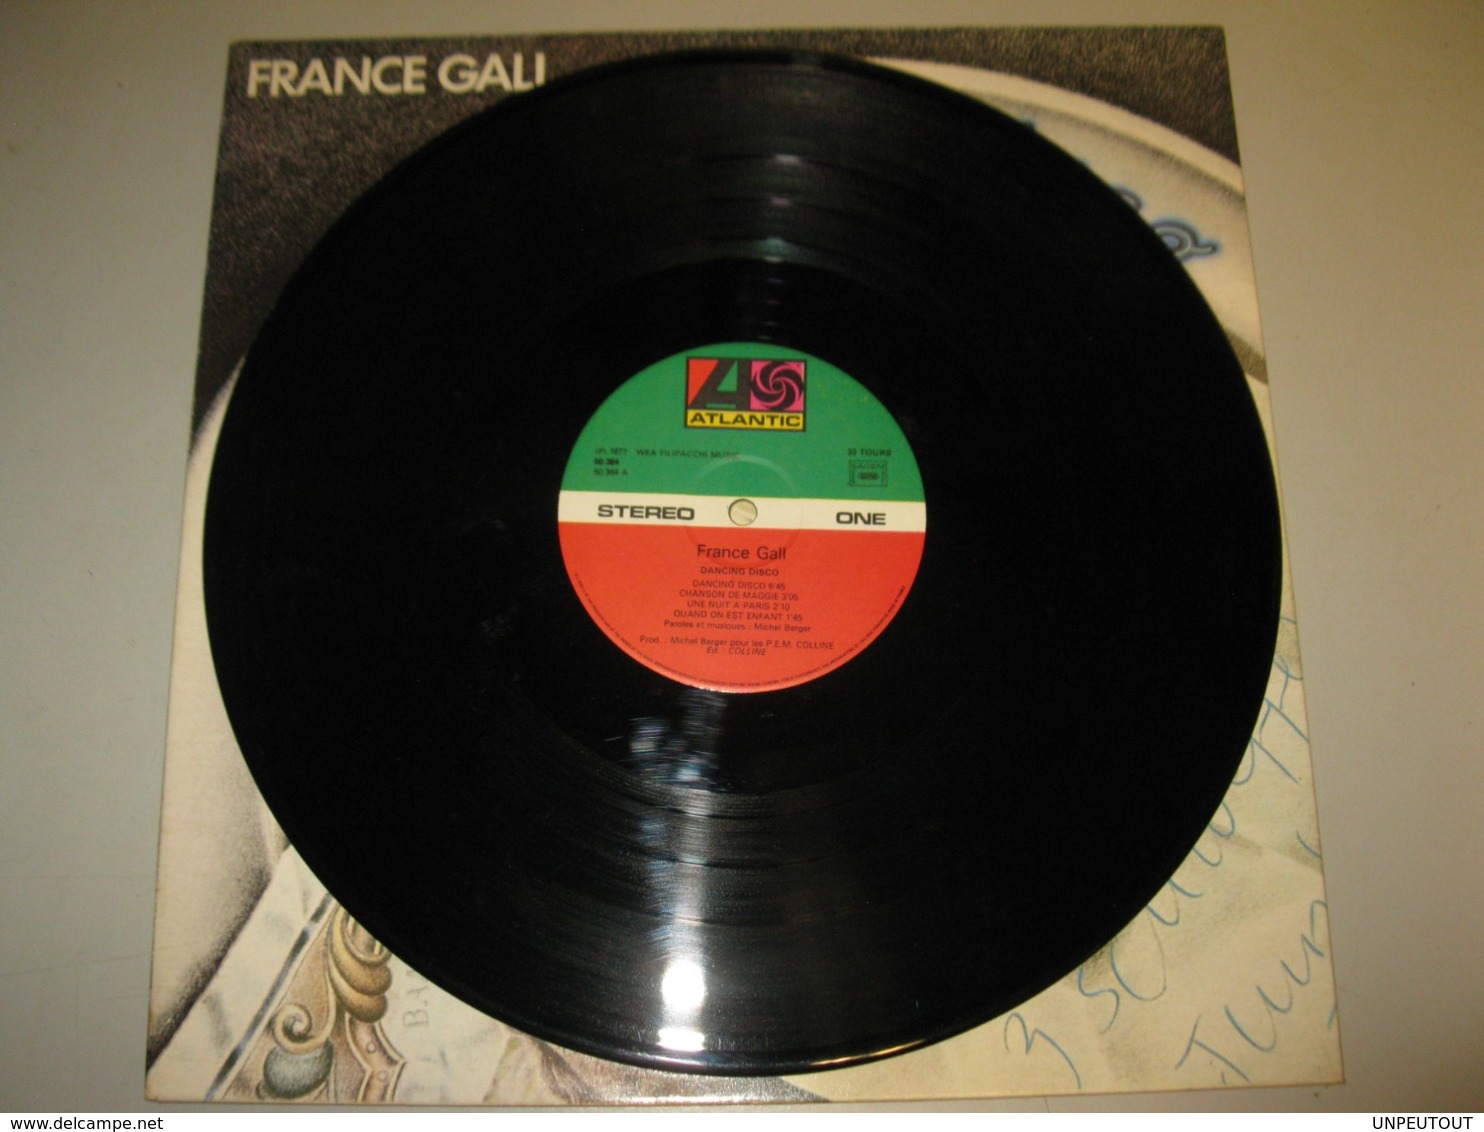 VINYLE FRANCE GALL "DANCING DISCO" 33 T ATLANTIC / WEA (1977) - Other - French Music